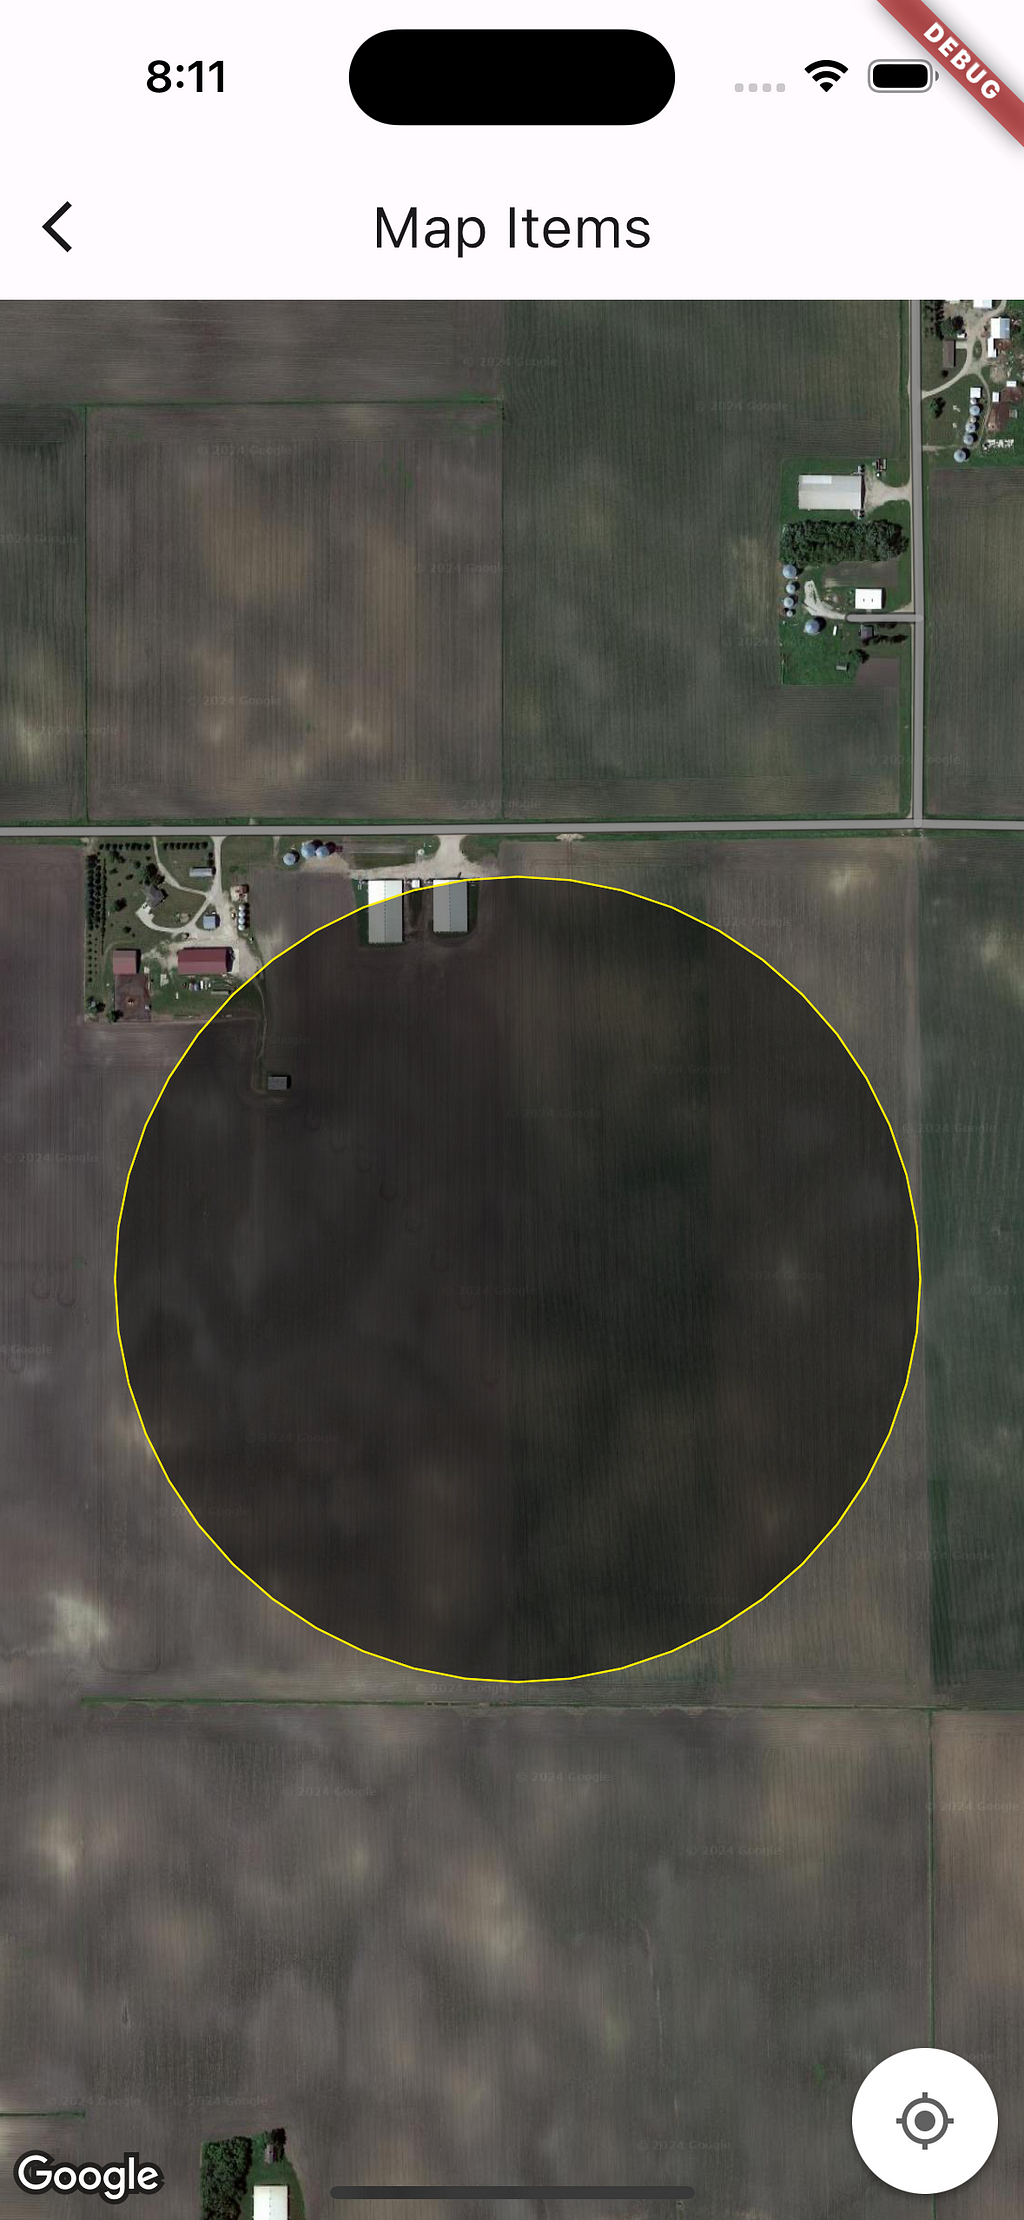 A screenshot of a map open on a smartphone. The map is showing satellite image of a farm in Northern part of USA. A circle is drawn on the map, the colour of the circle is yellow and it is filled with translucent black color.